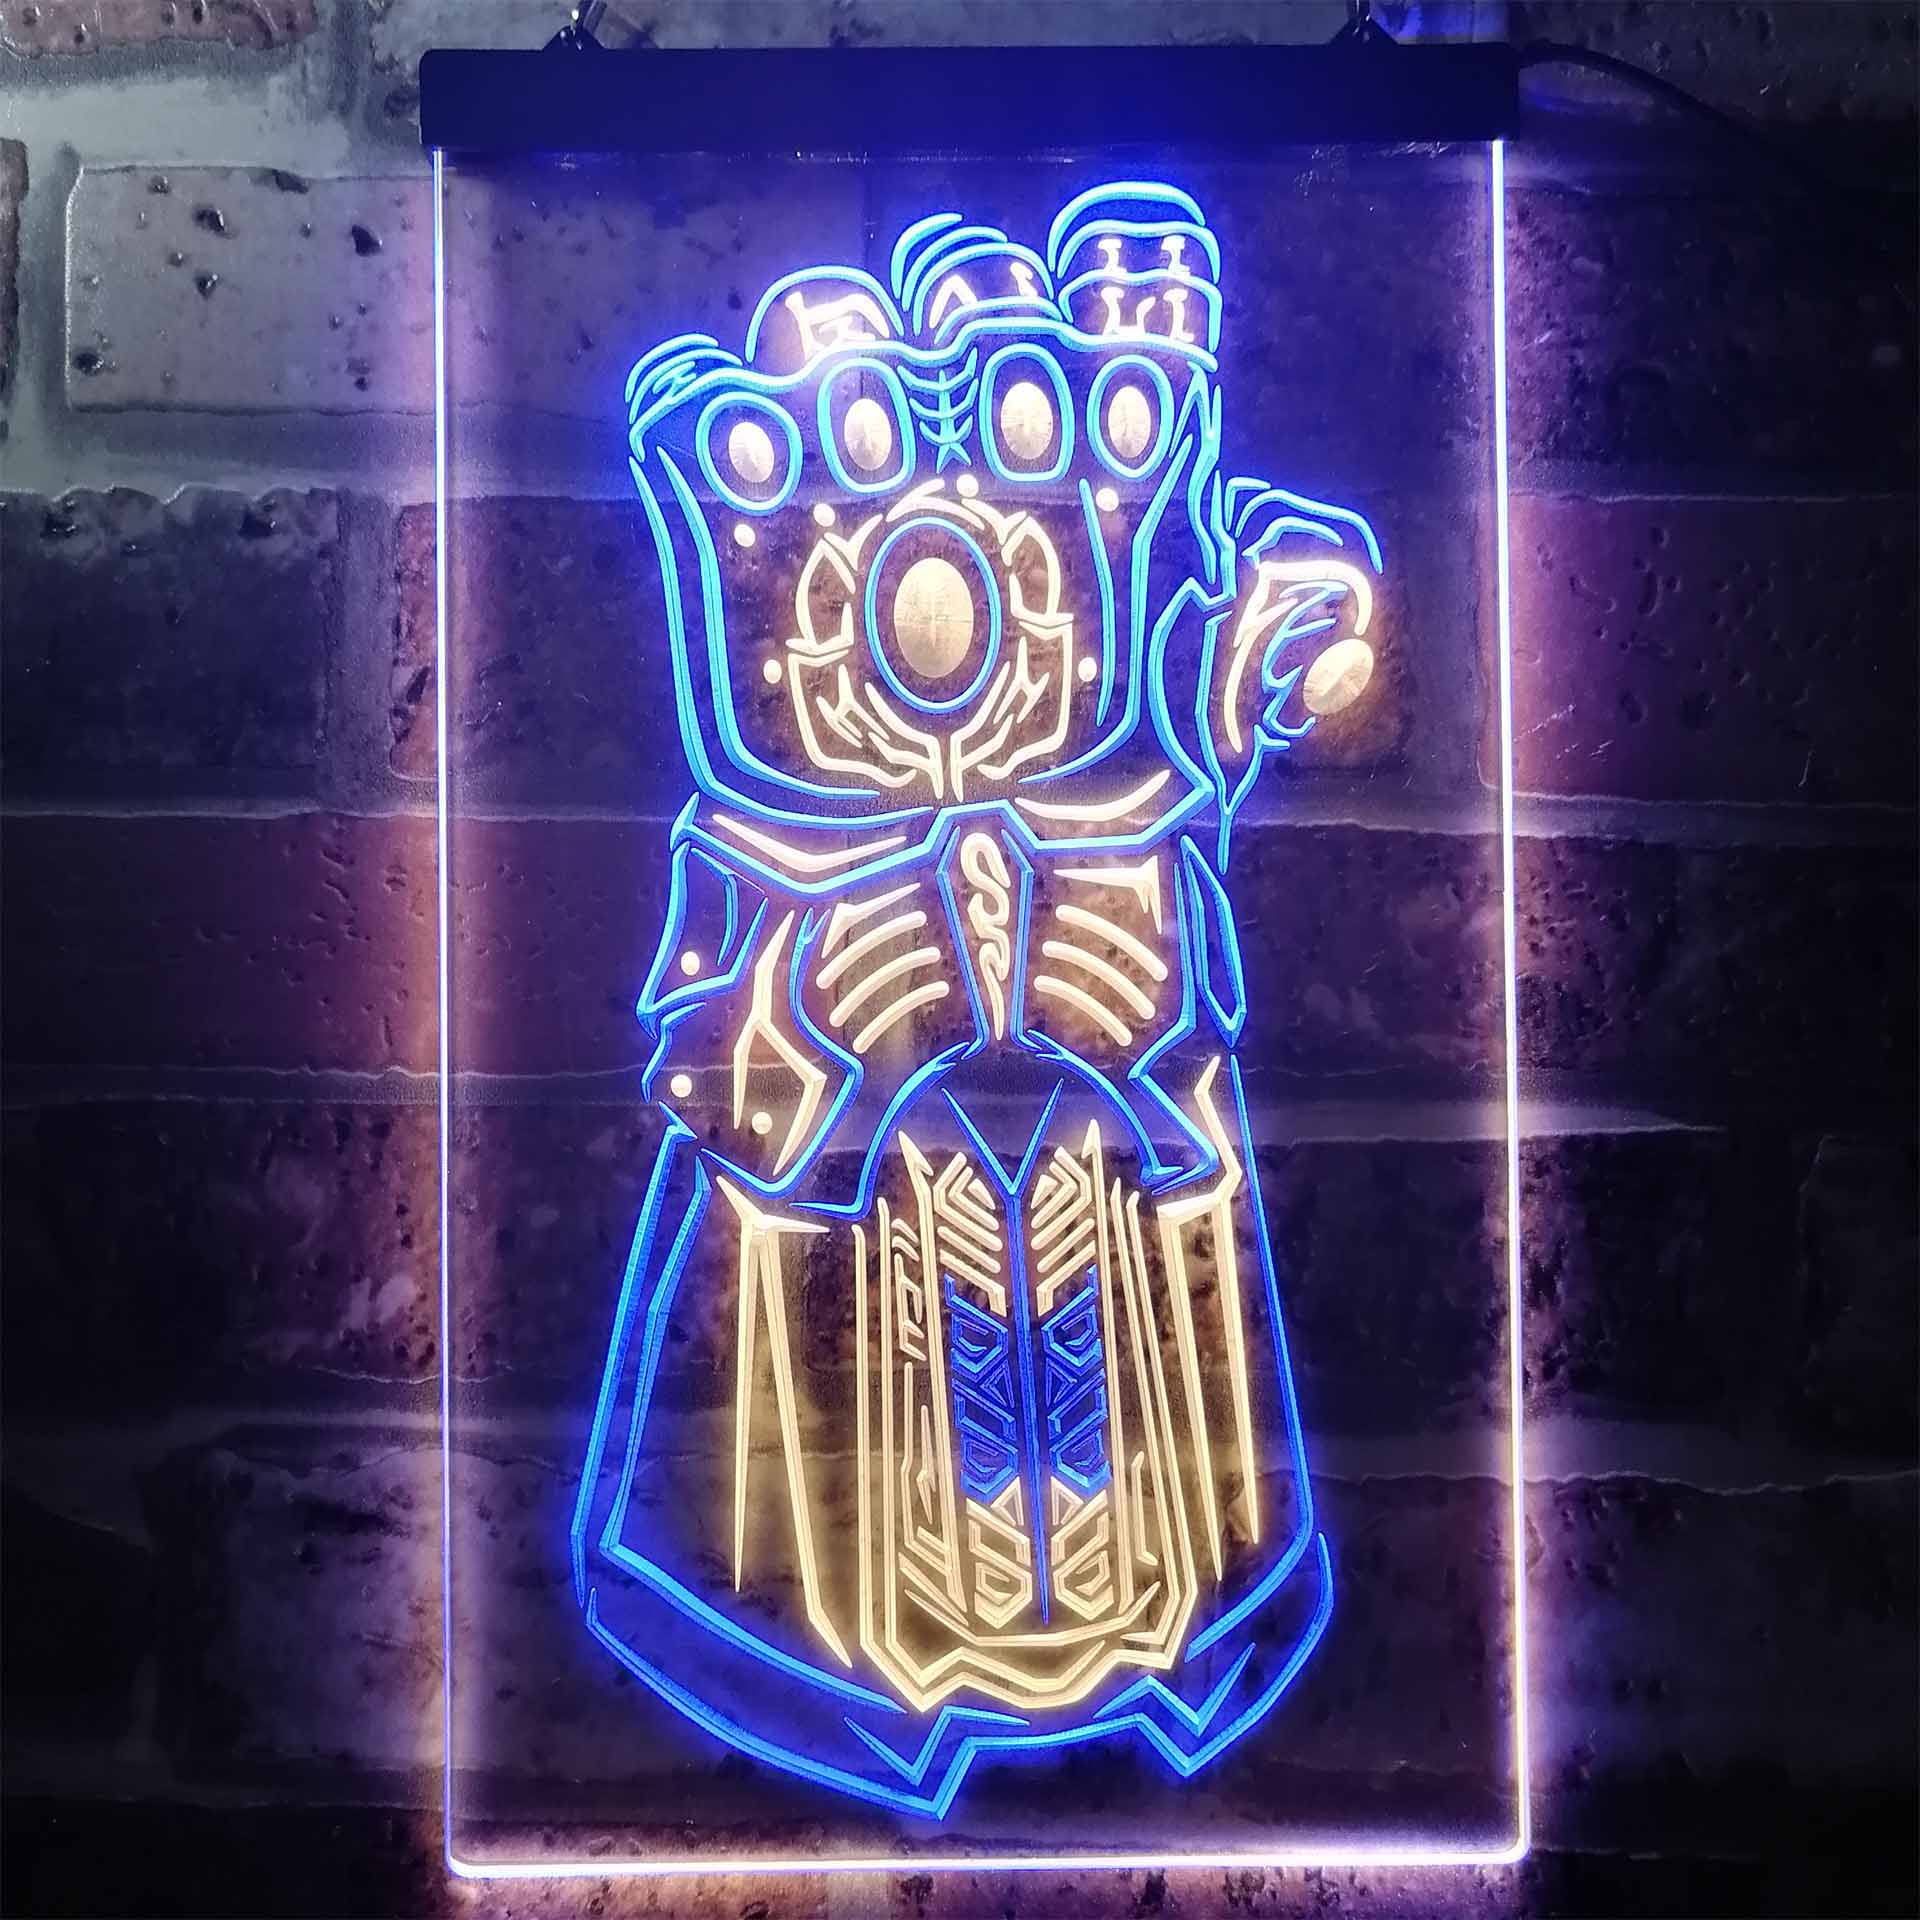 12" x 8" Avengers Infinity Gauntlet Thanos LED Neon Sign